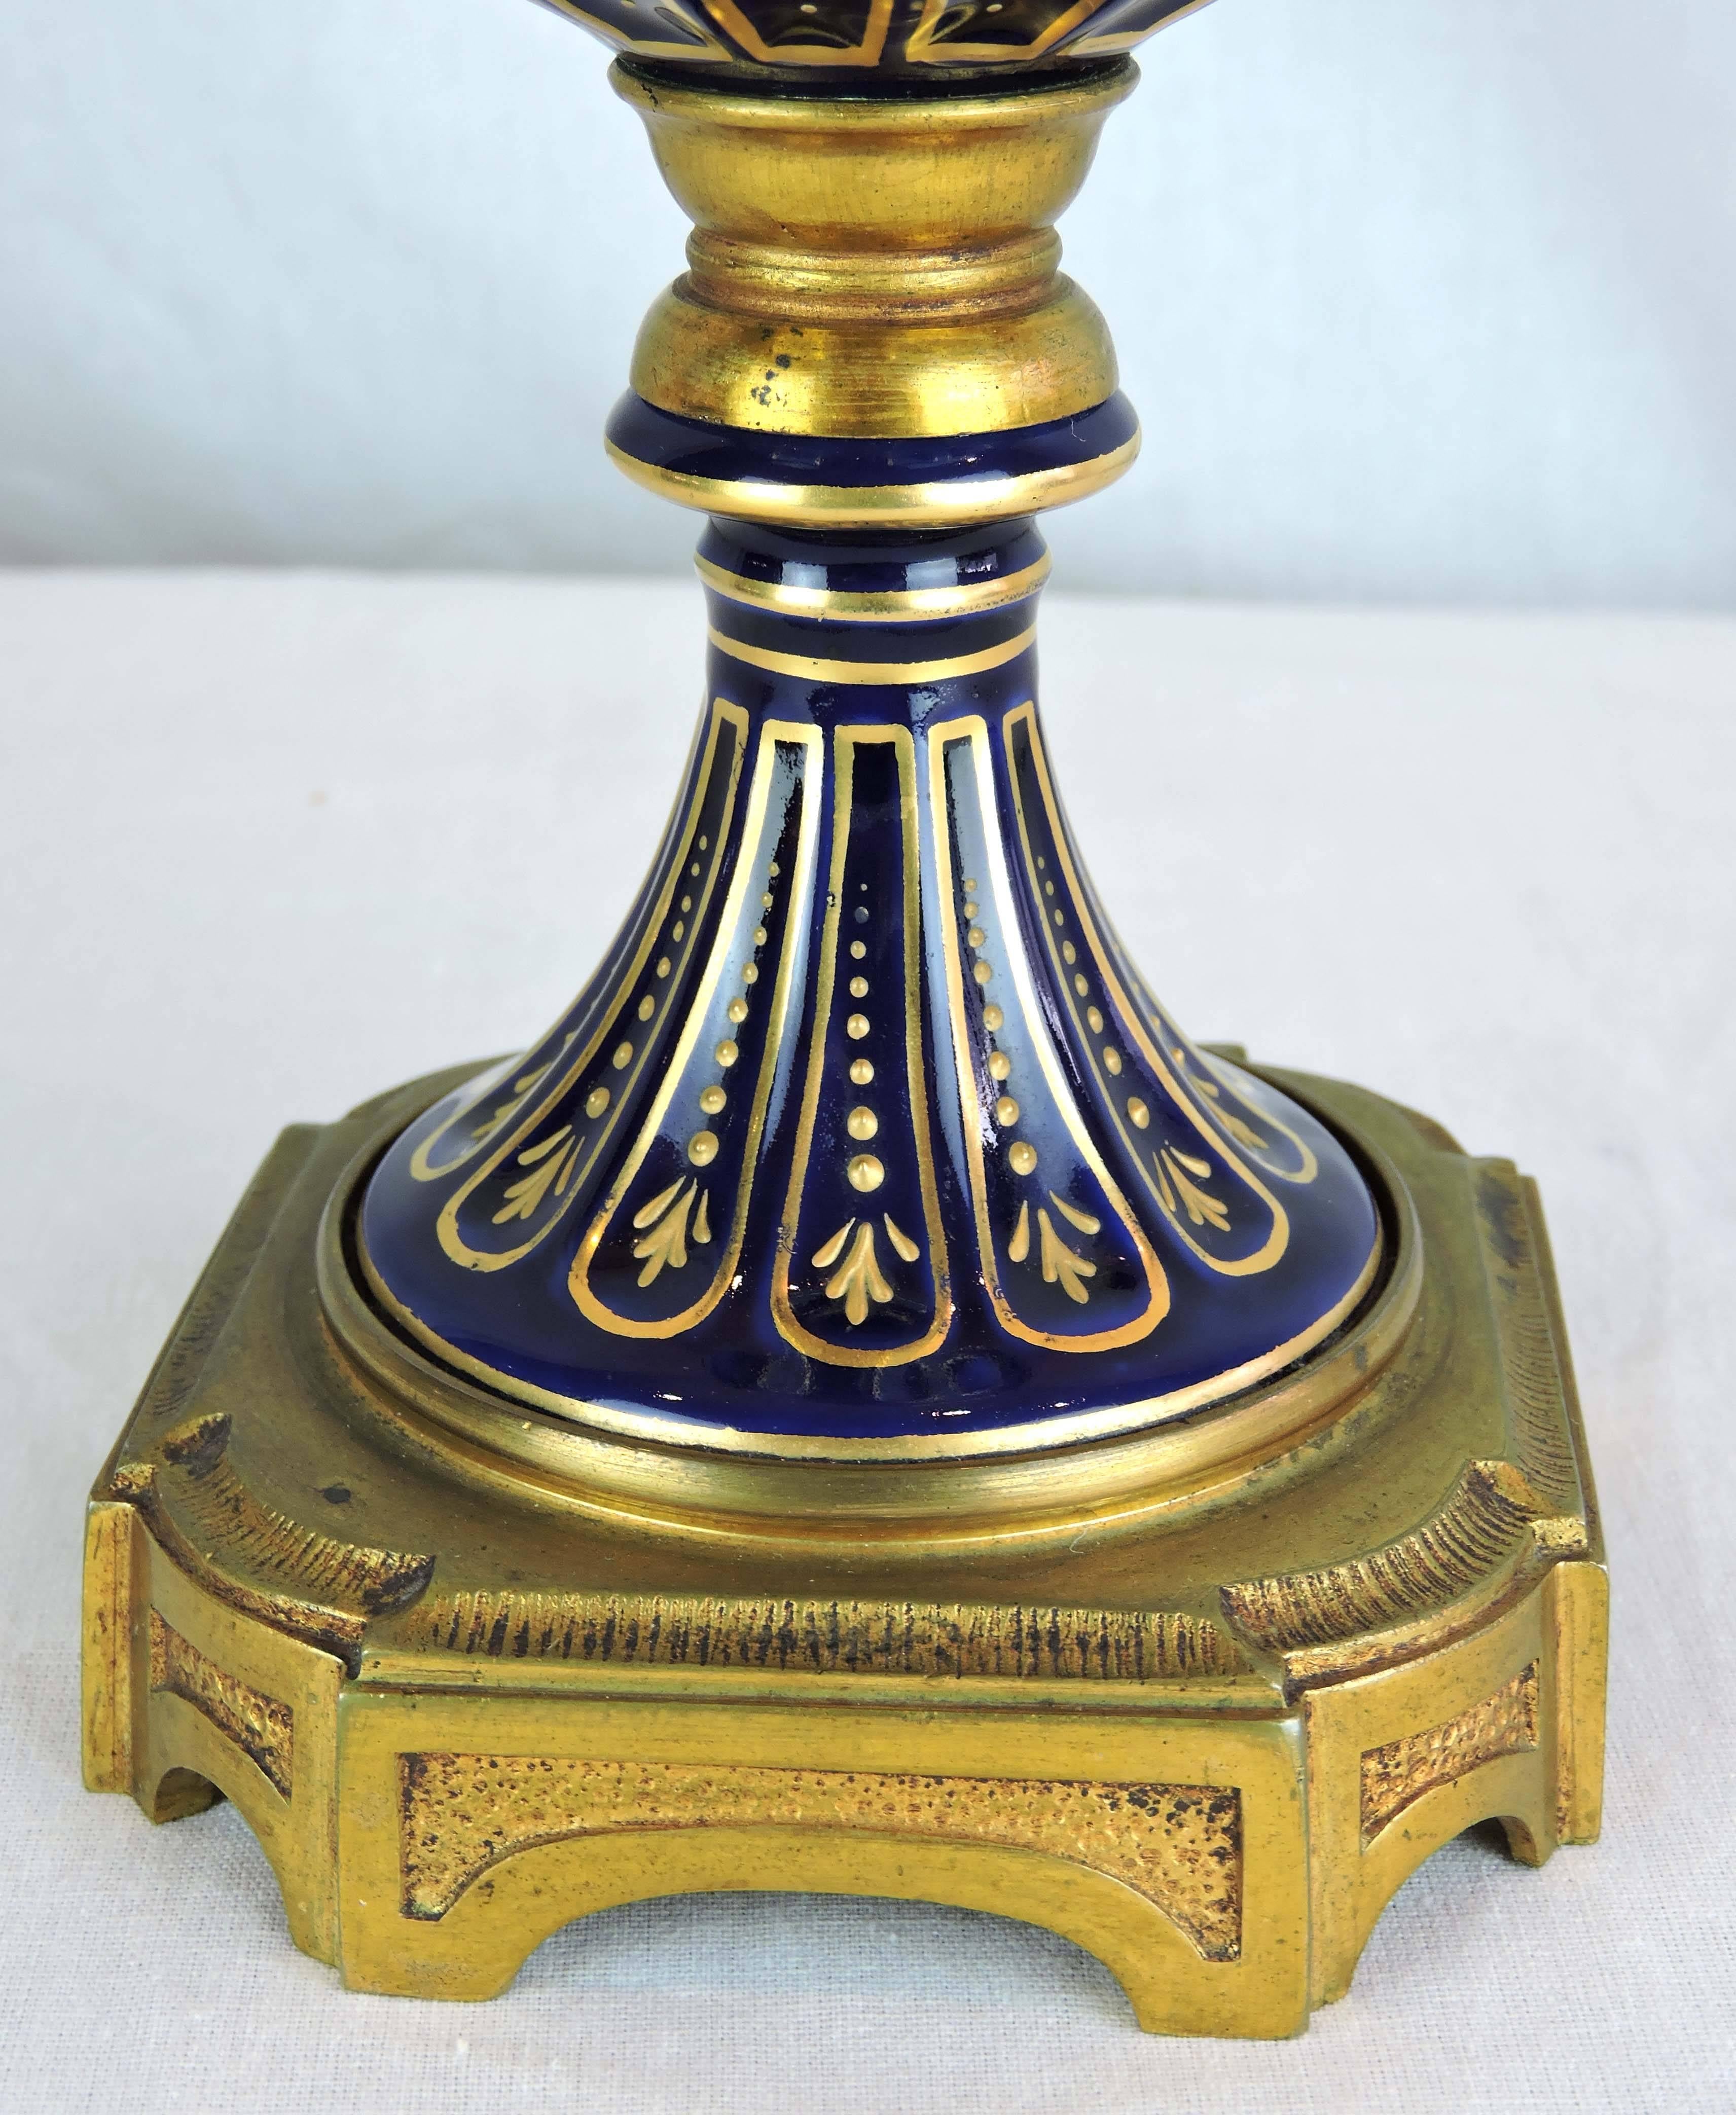 Pair of French Sevres Style Porcelain and Gilt Bronze Lidded Baluster Urns For Sale 1